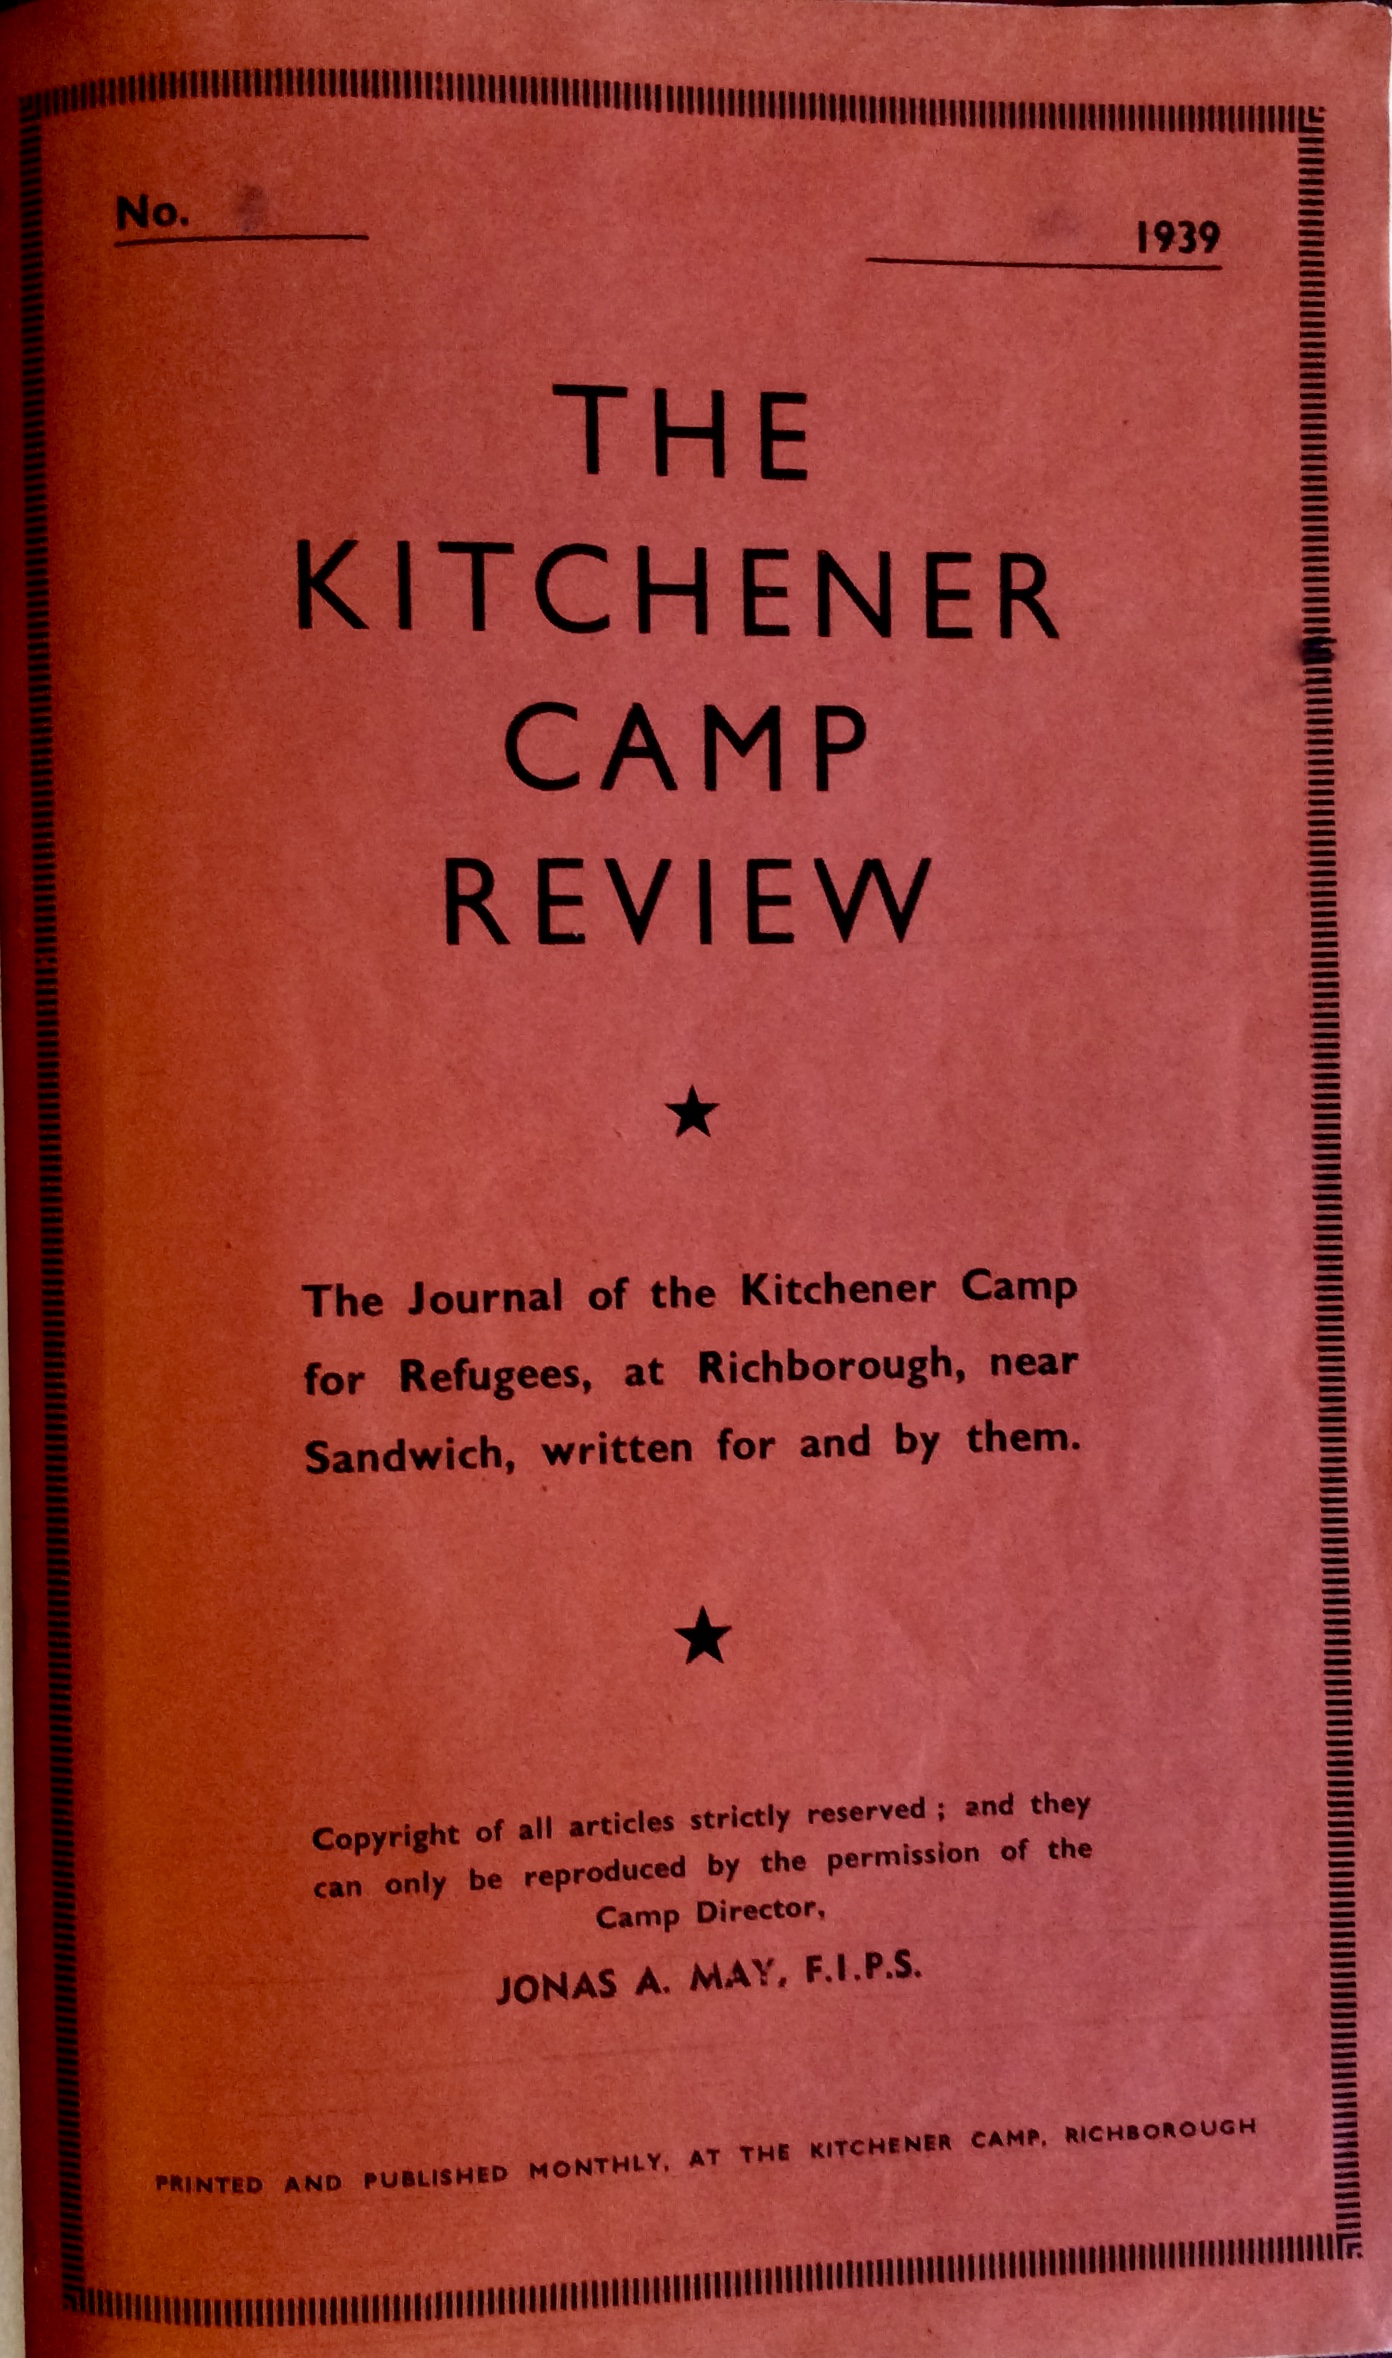 Kitchener Camp Review cover